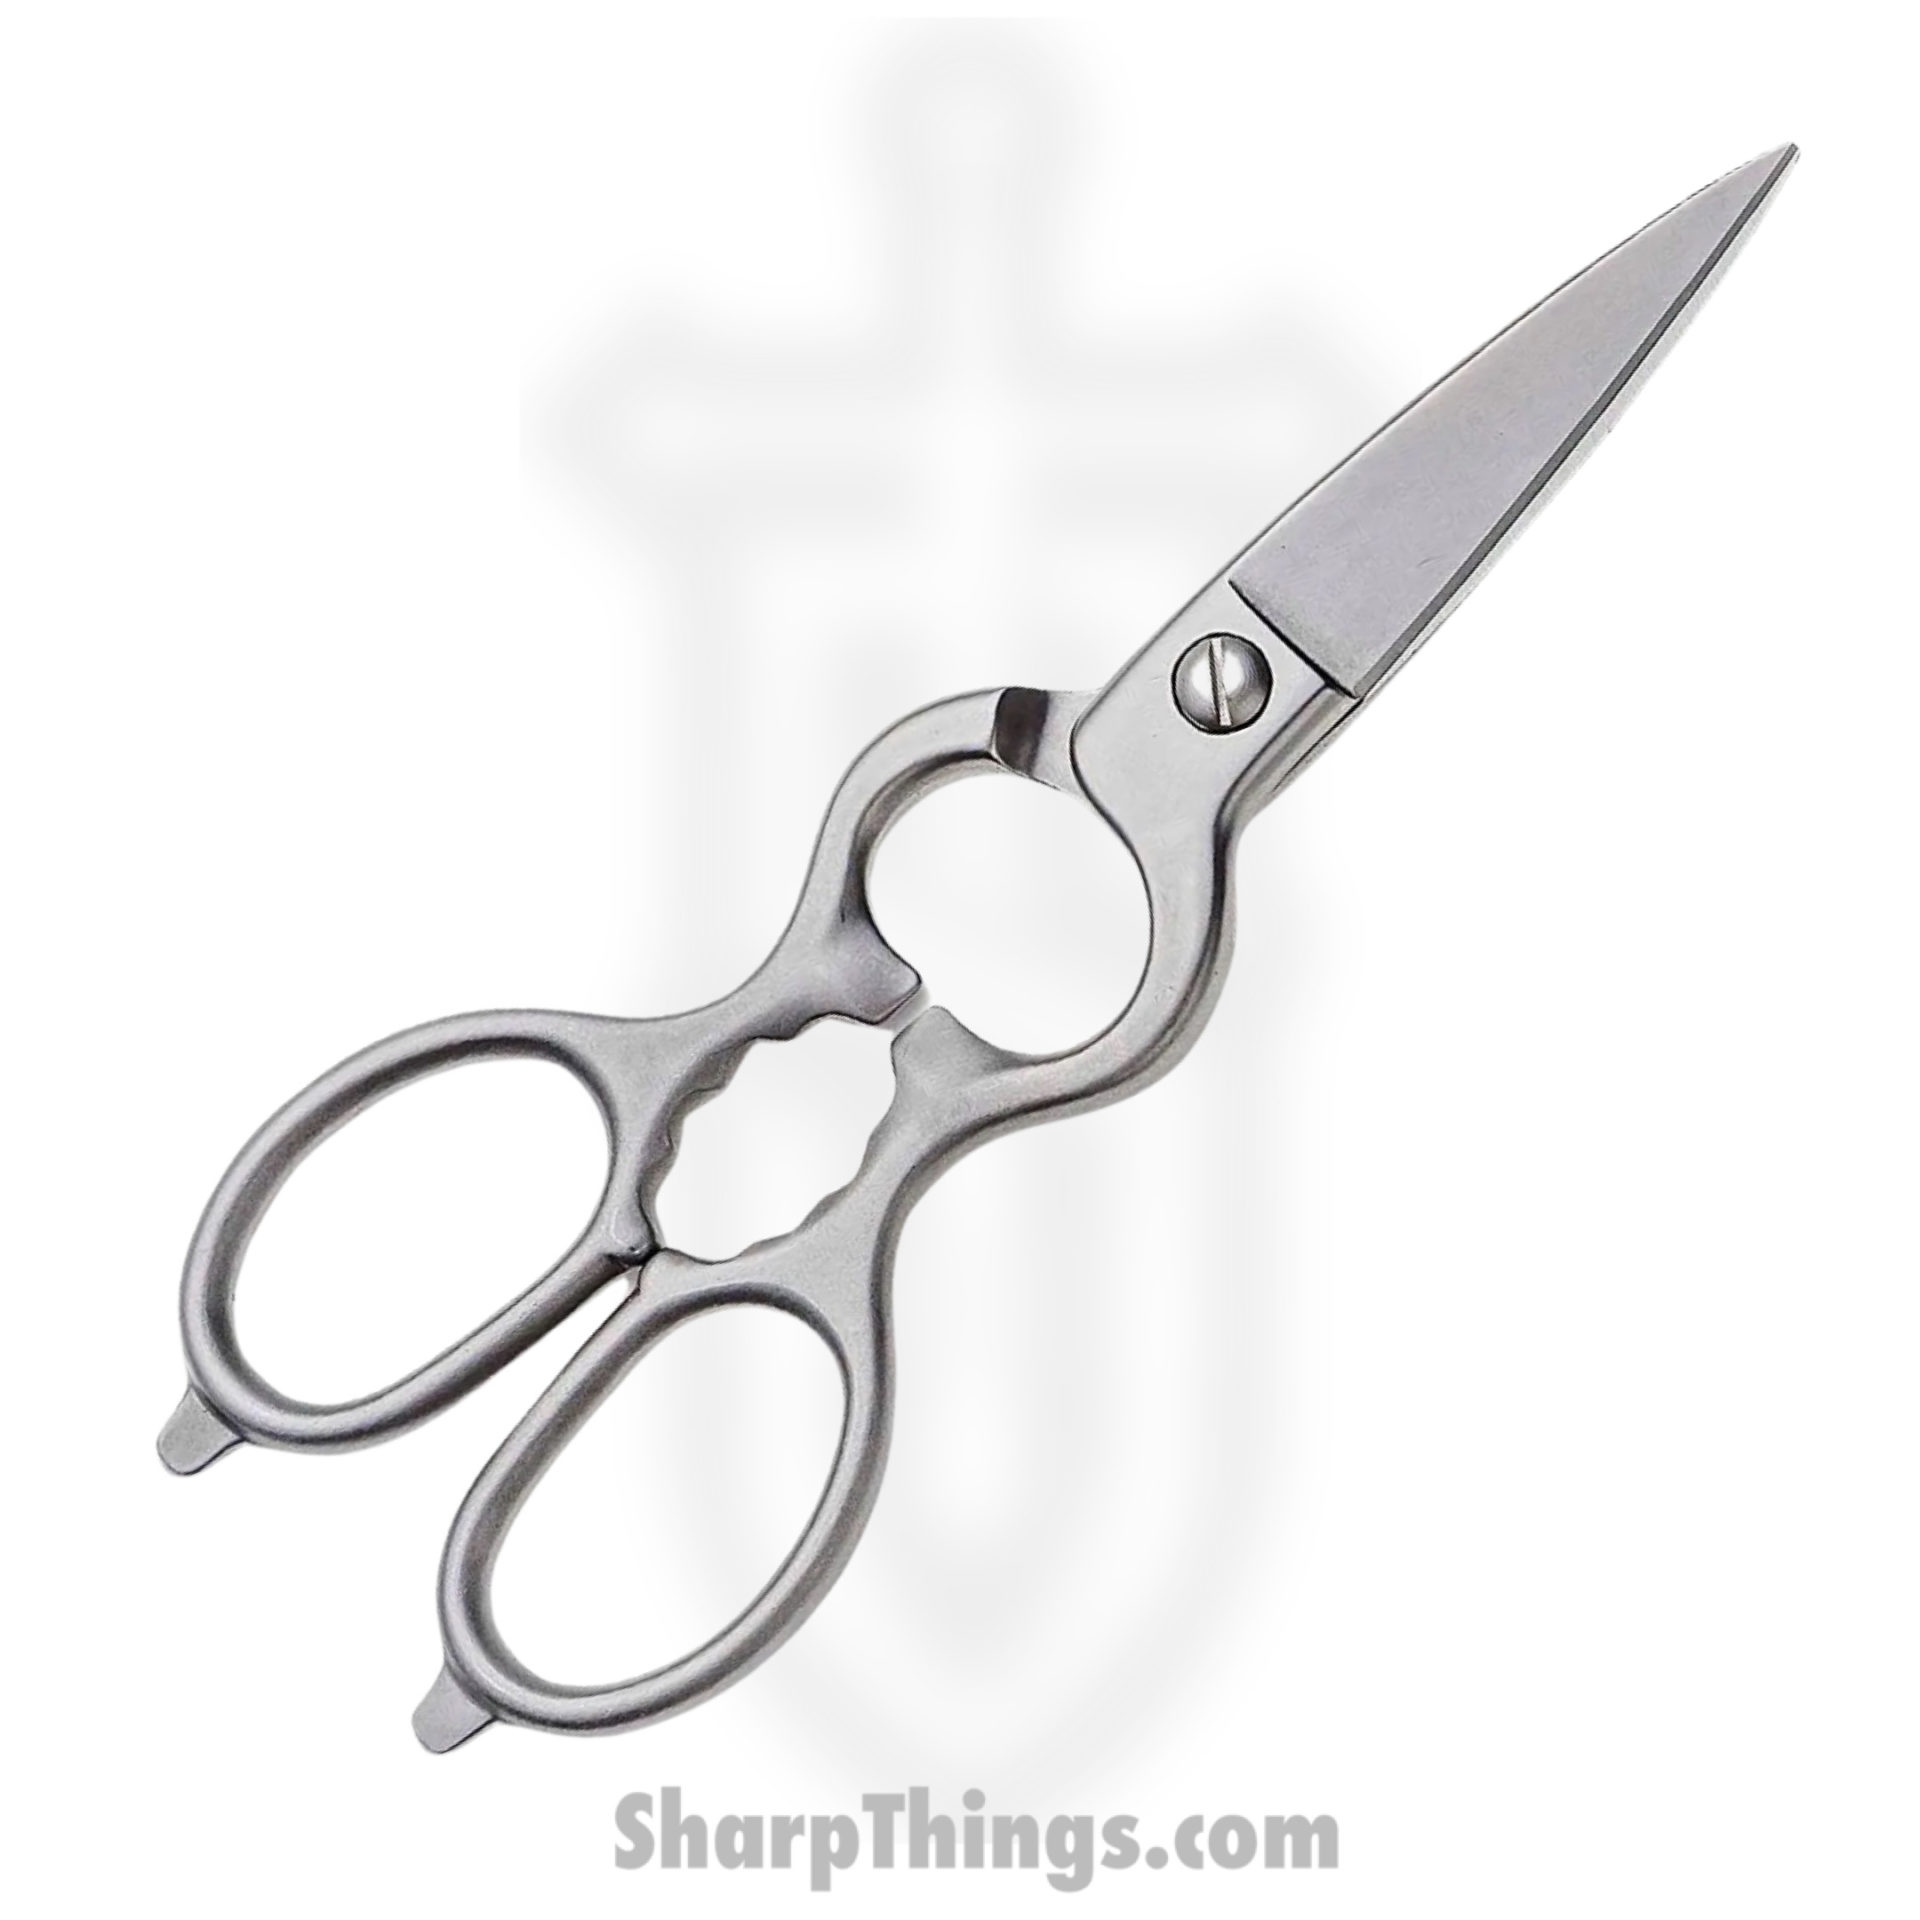 Wusthof Brushed Stainless Steel Come-Apart Kitchen Shears